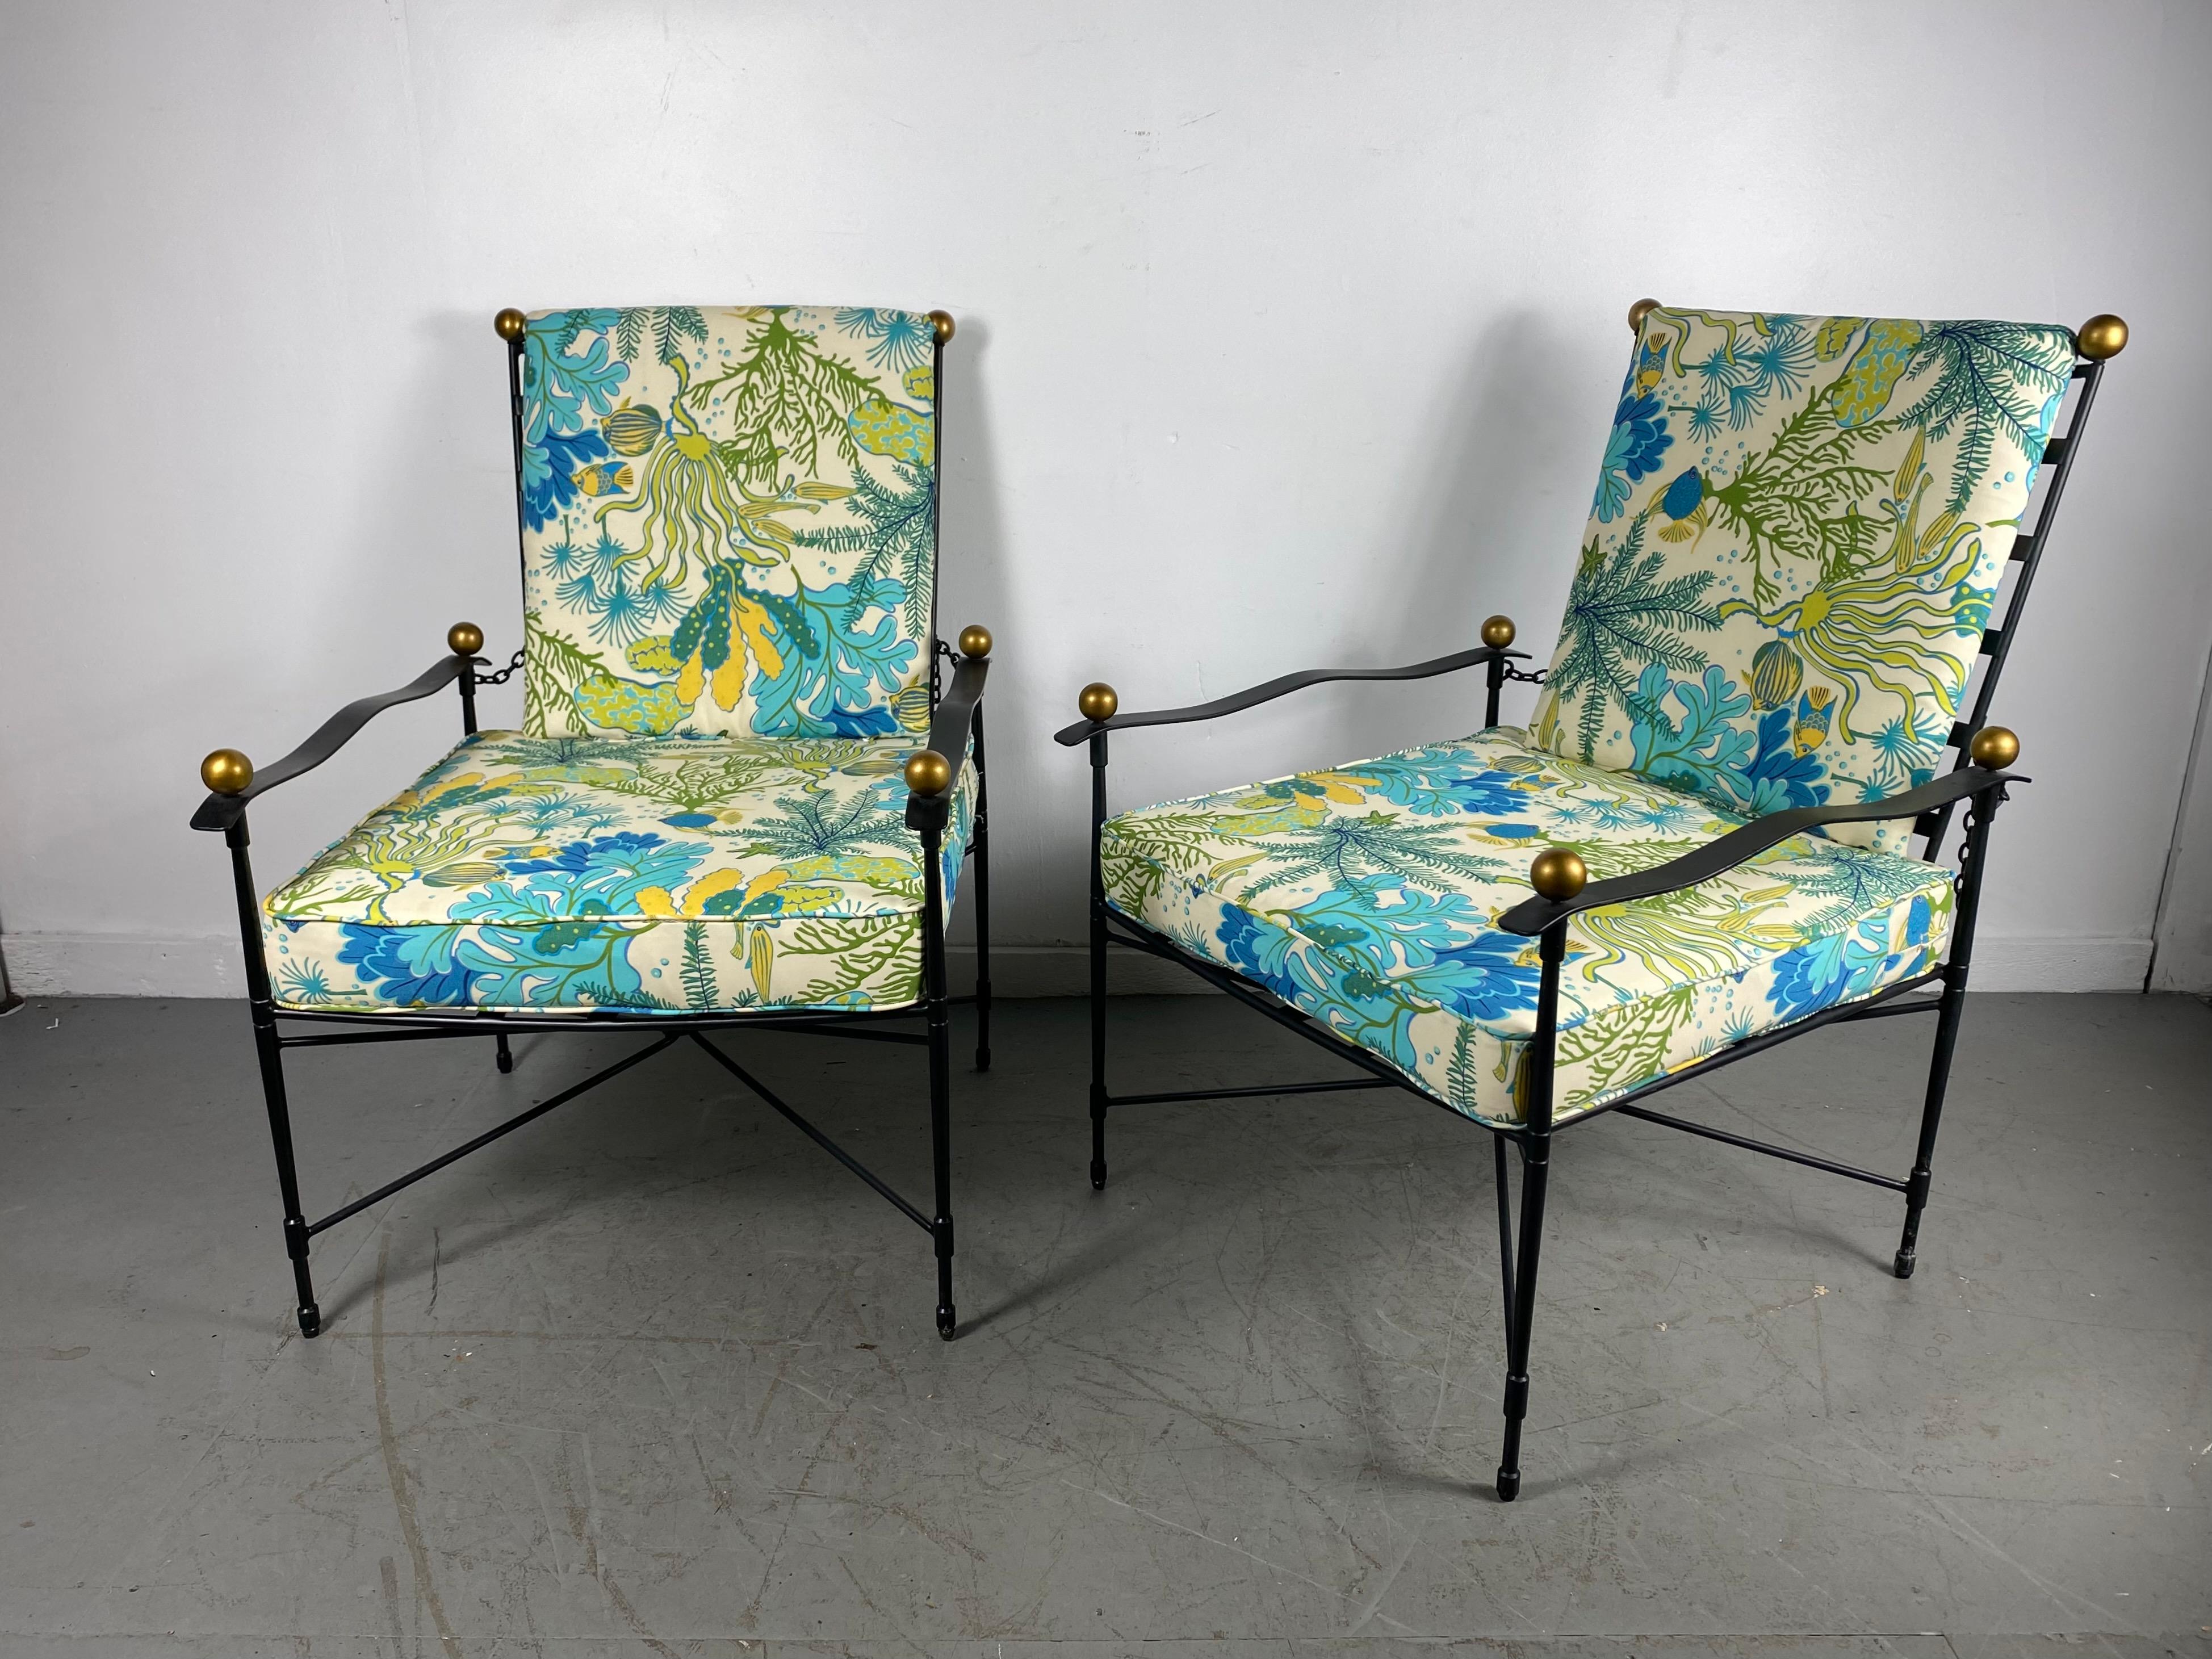 Mario Papperzini designed for John Salterini, set of 4 matching wrought iron adjustable lattice back lounge chairs for indoor or outdoor use. This set has been kept in its original vintage and aged condition, Set retains stunning custom seat and